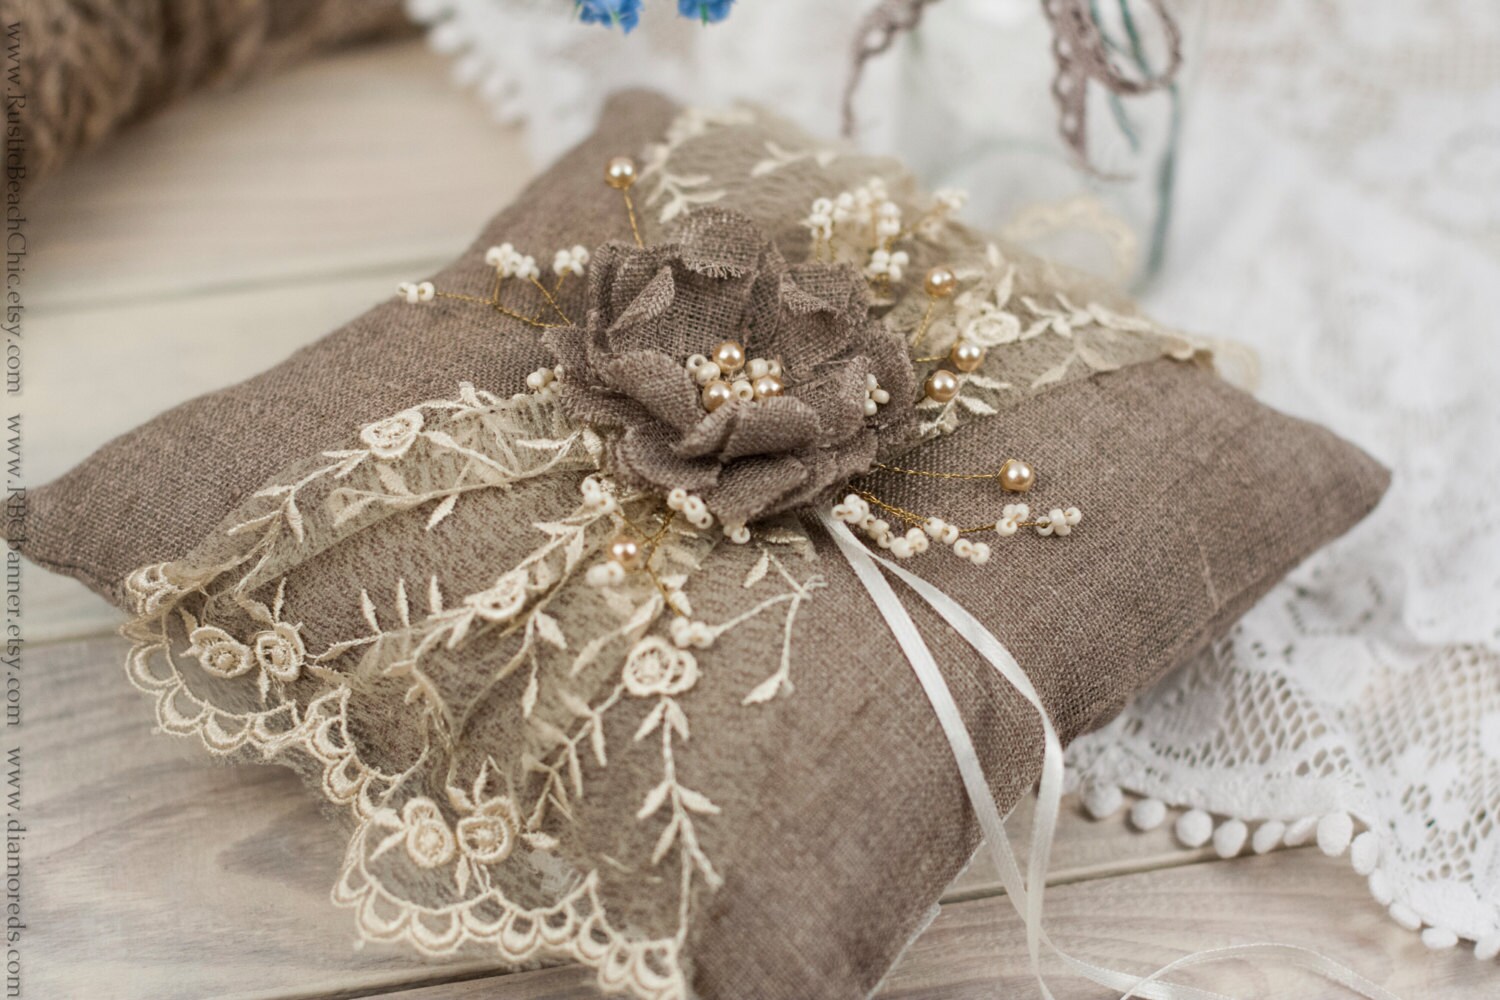 Rustic Chic Wedding ring bearer pillow with rope, lace, pearl and  handmade burlap flower